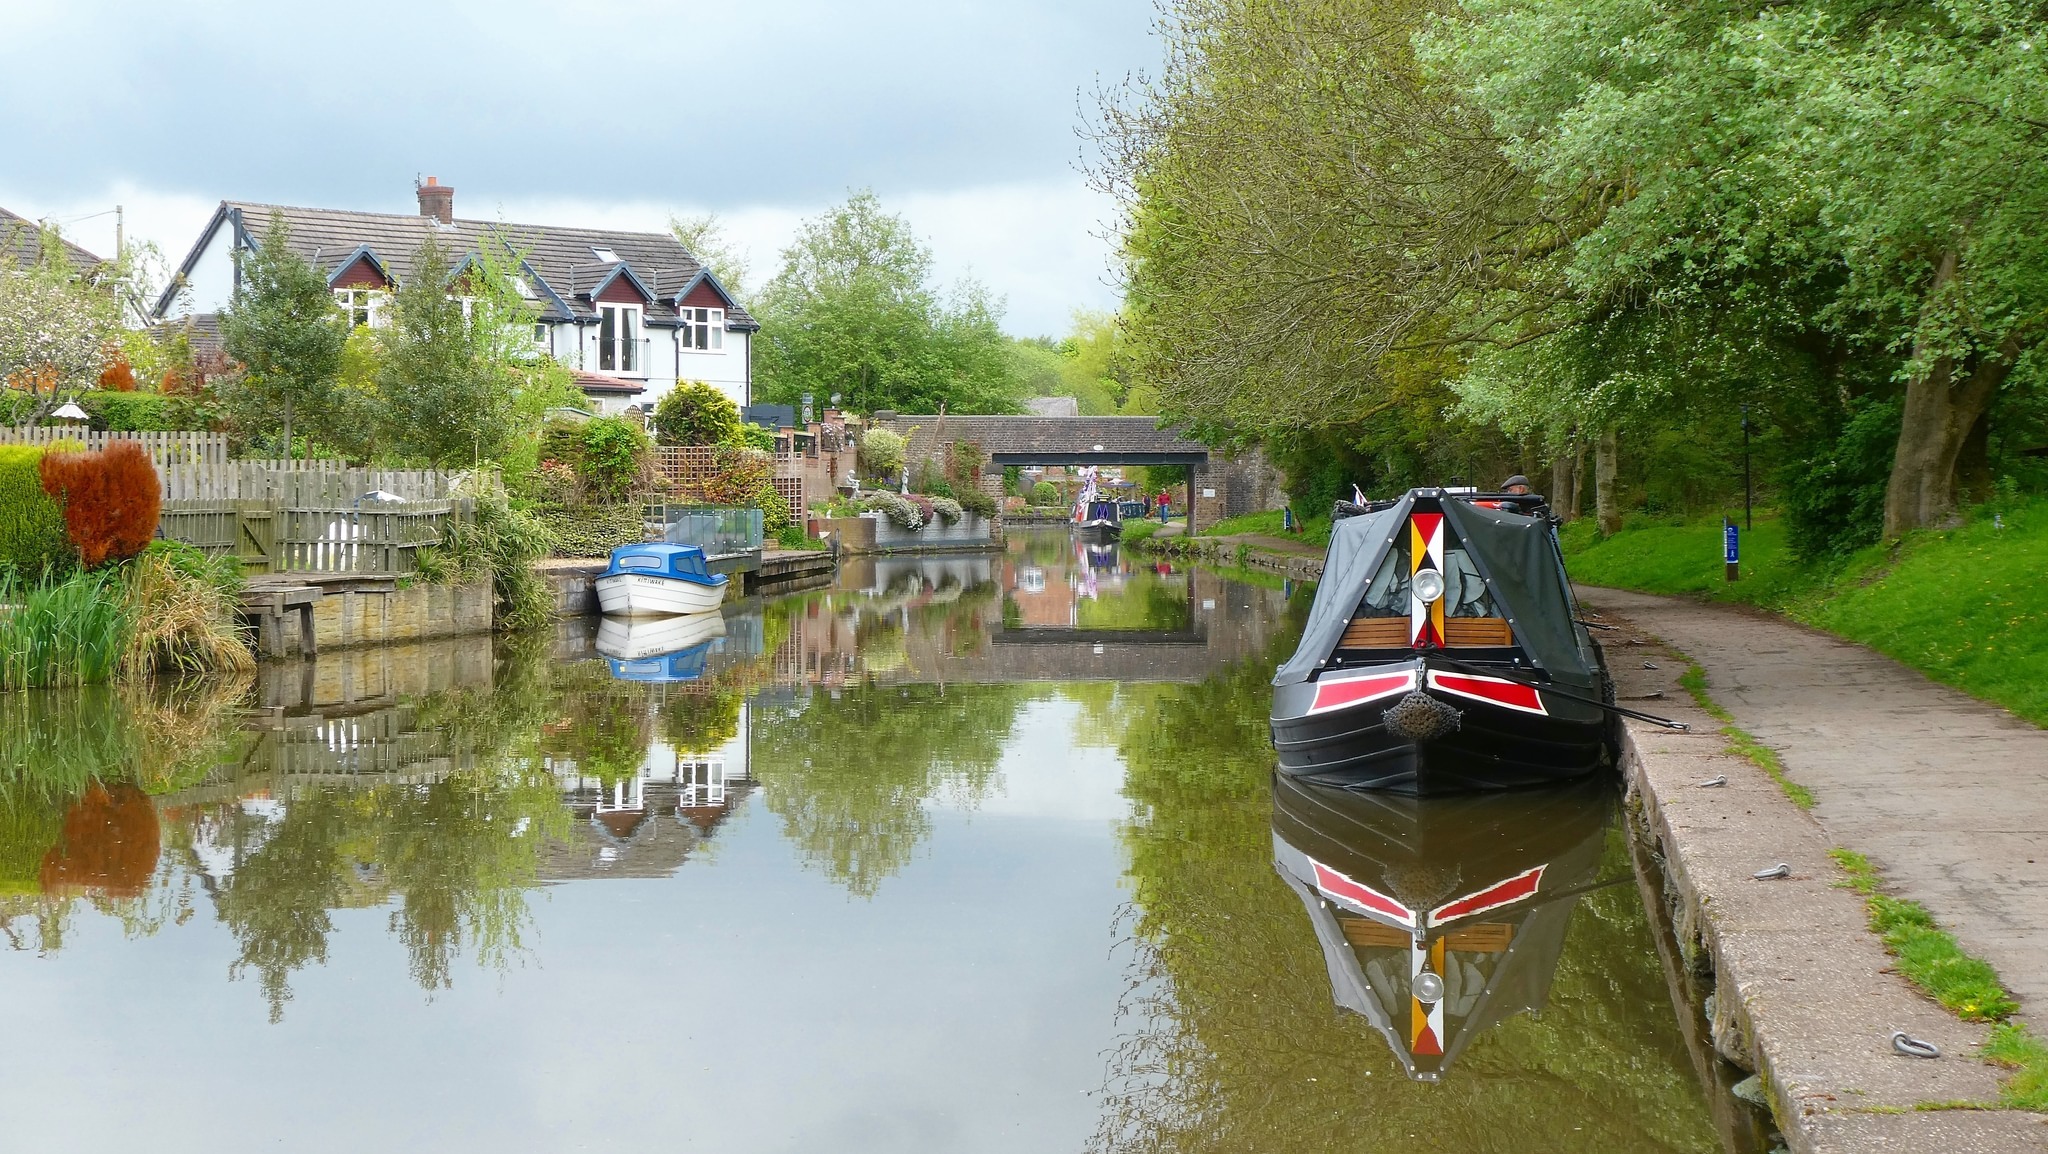 Boating on the Trent and Mersey canal by Lynne Bentley